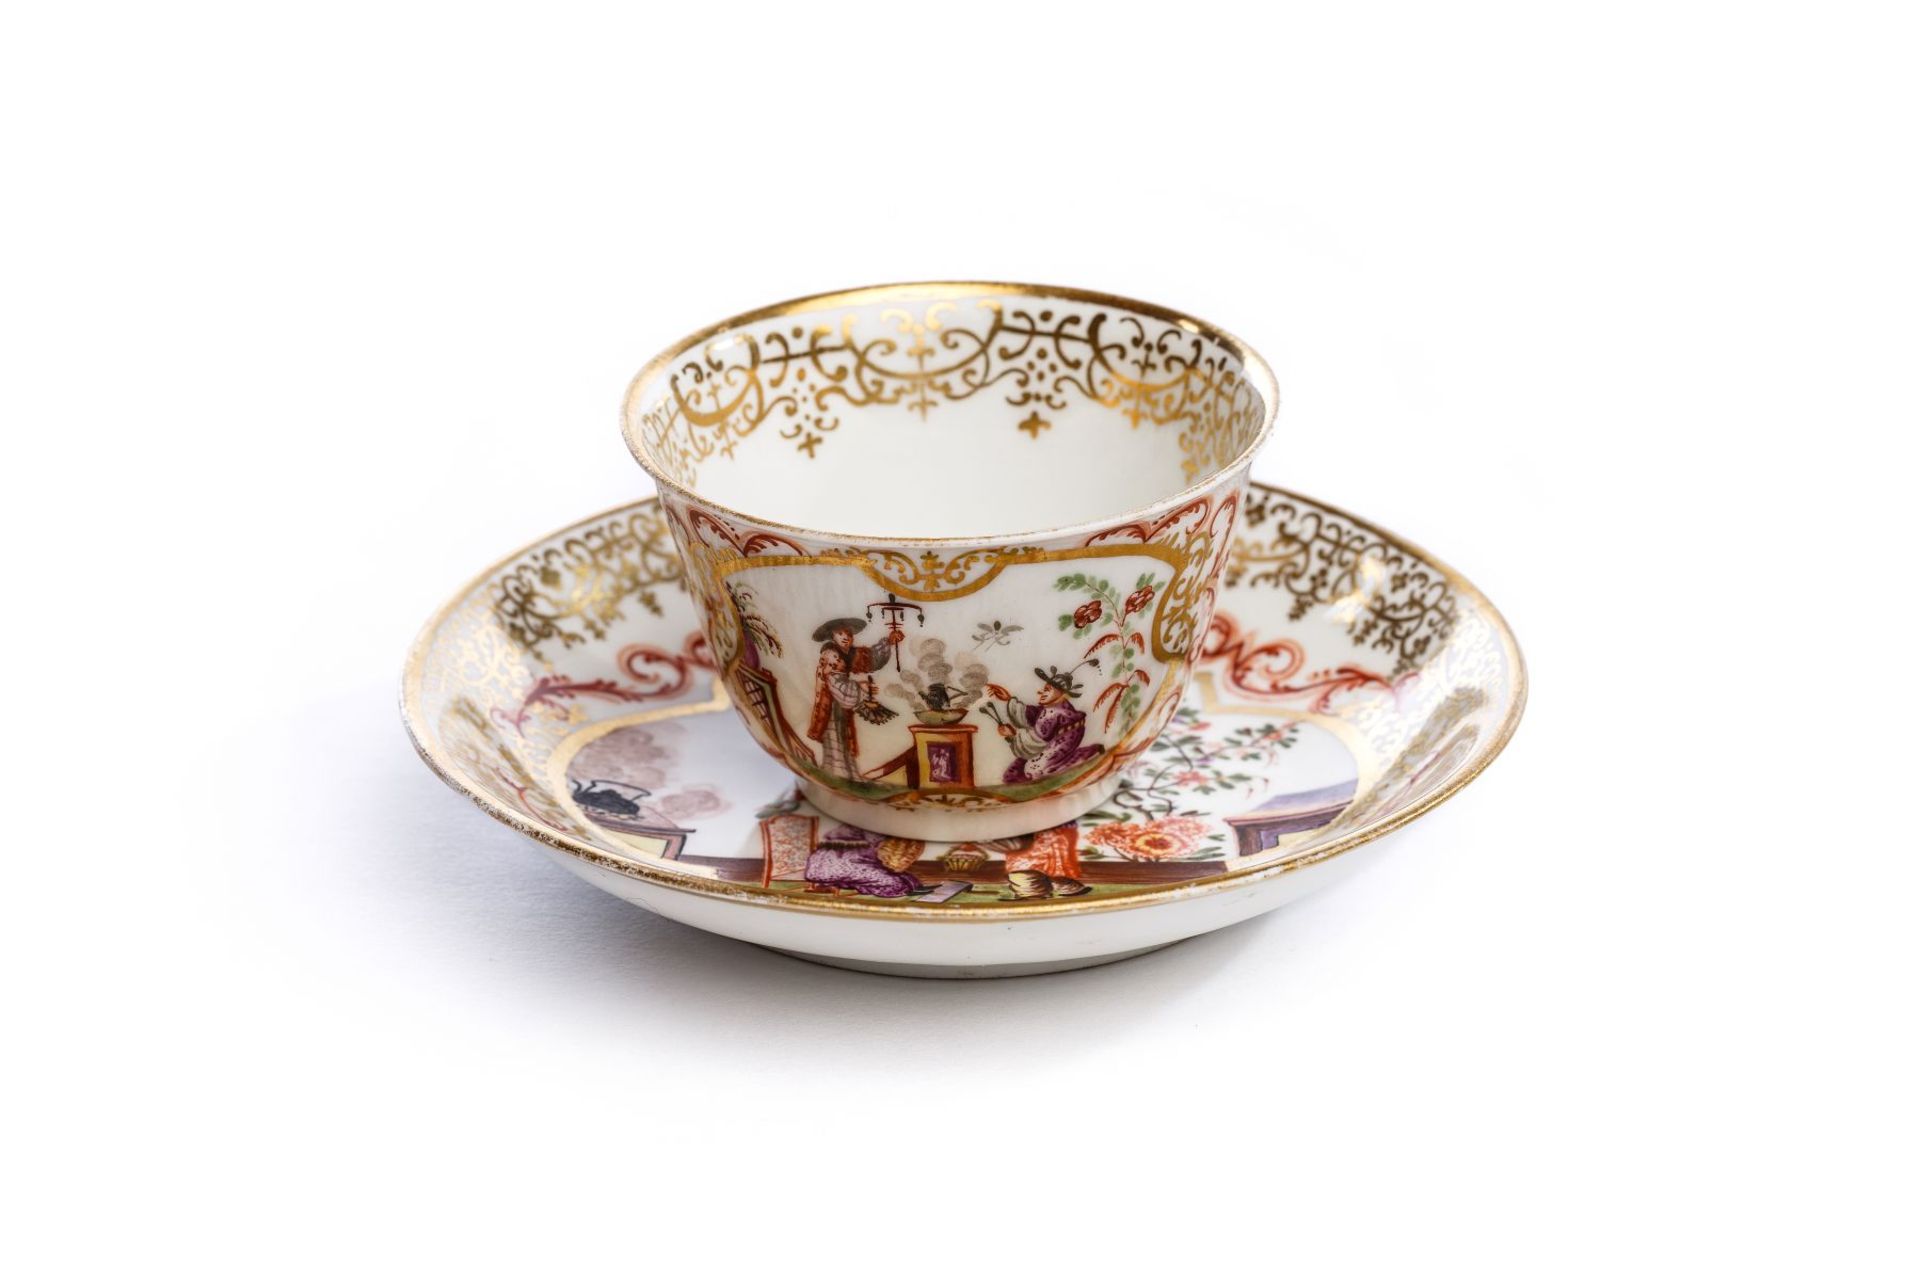 Bowl with Saucer, Meissen 1725 - Image 4 of 6